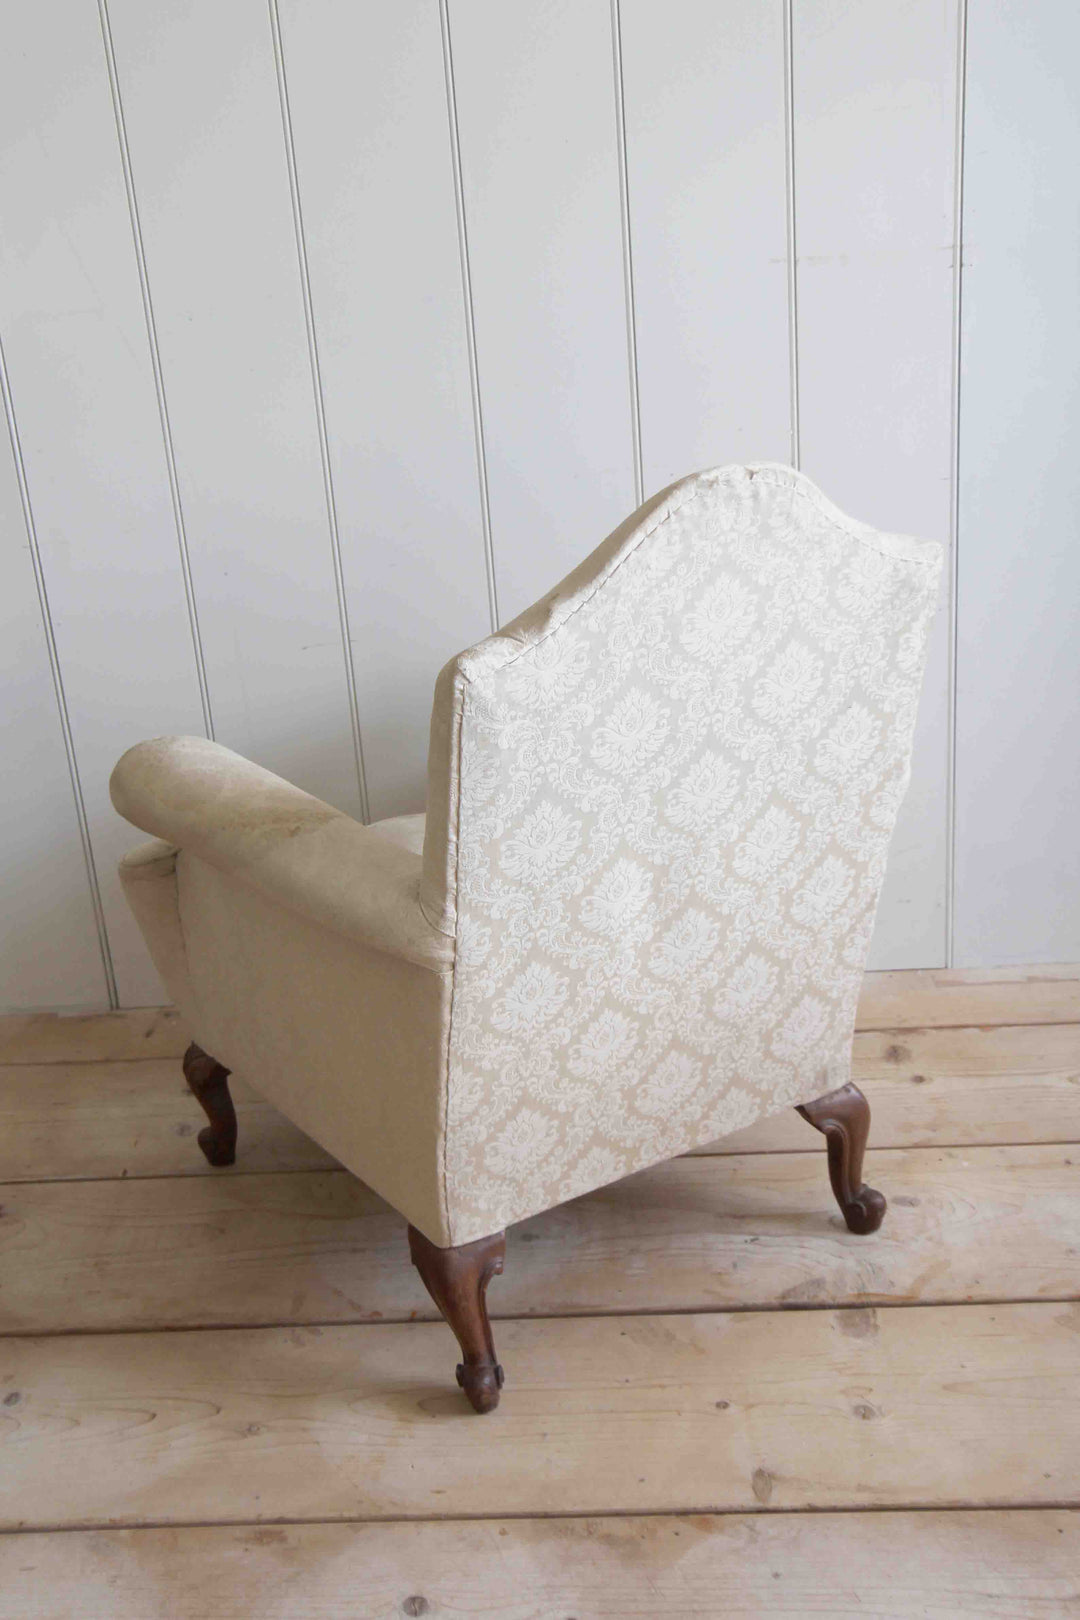 Camel Back Armchair / Upholstery Project